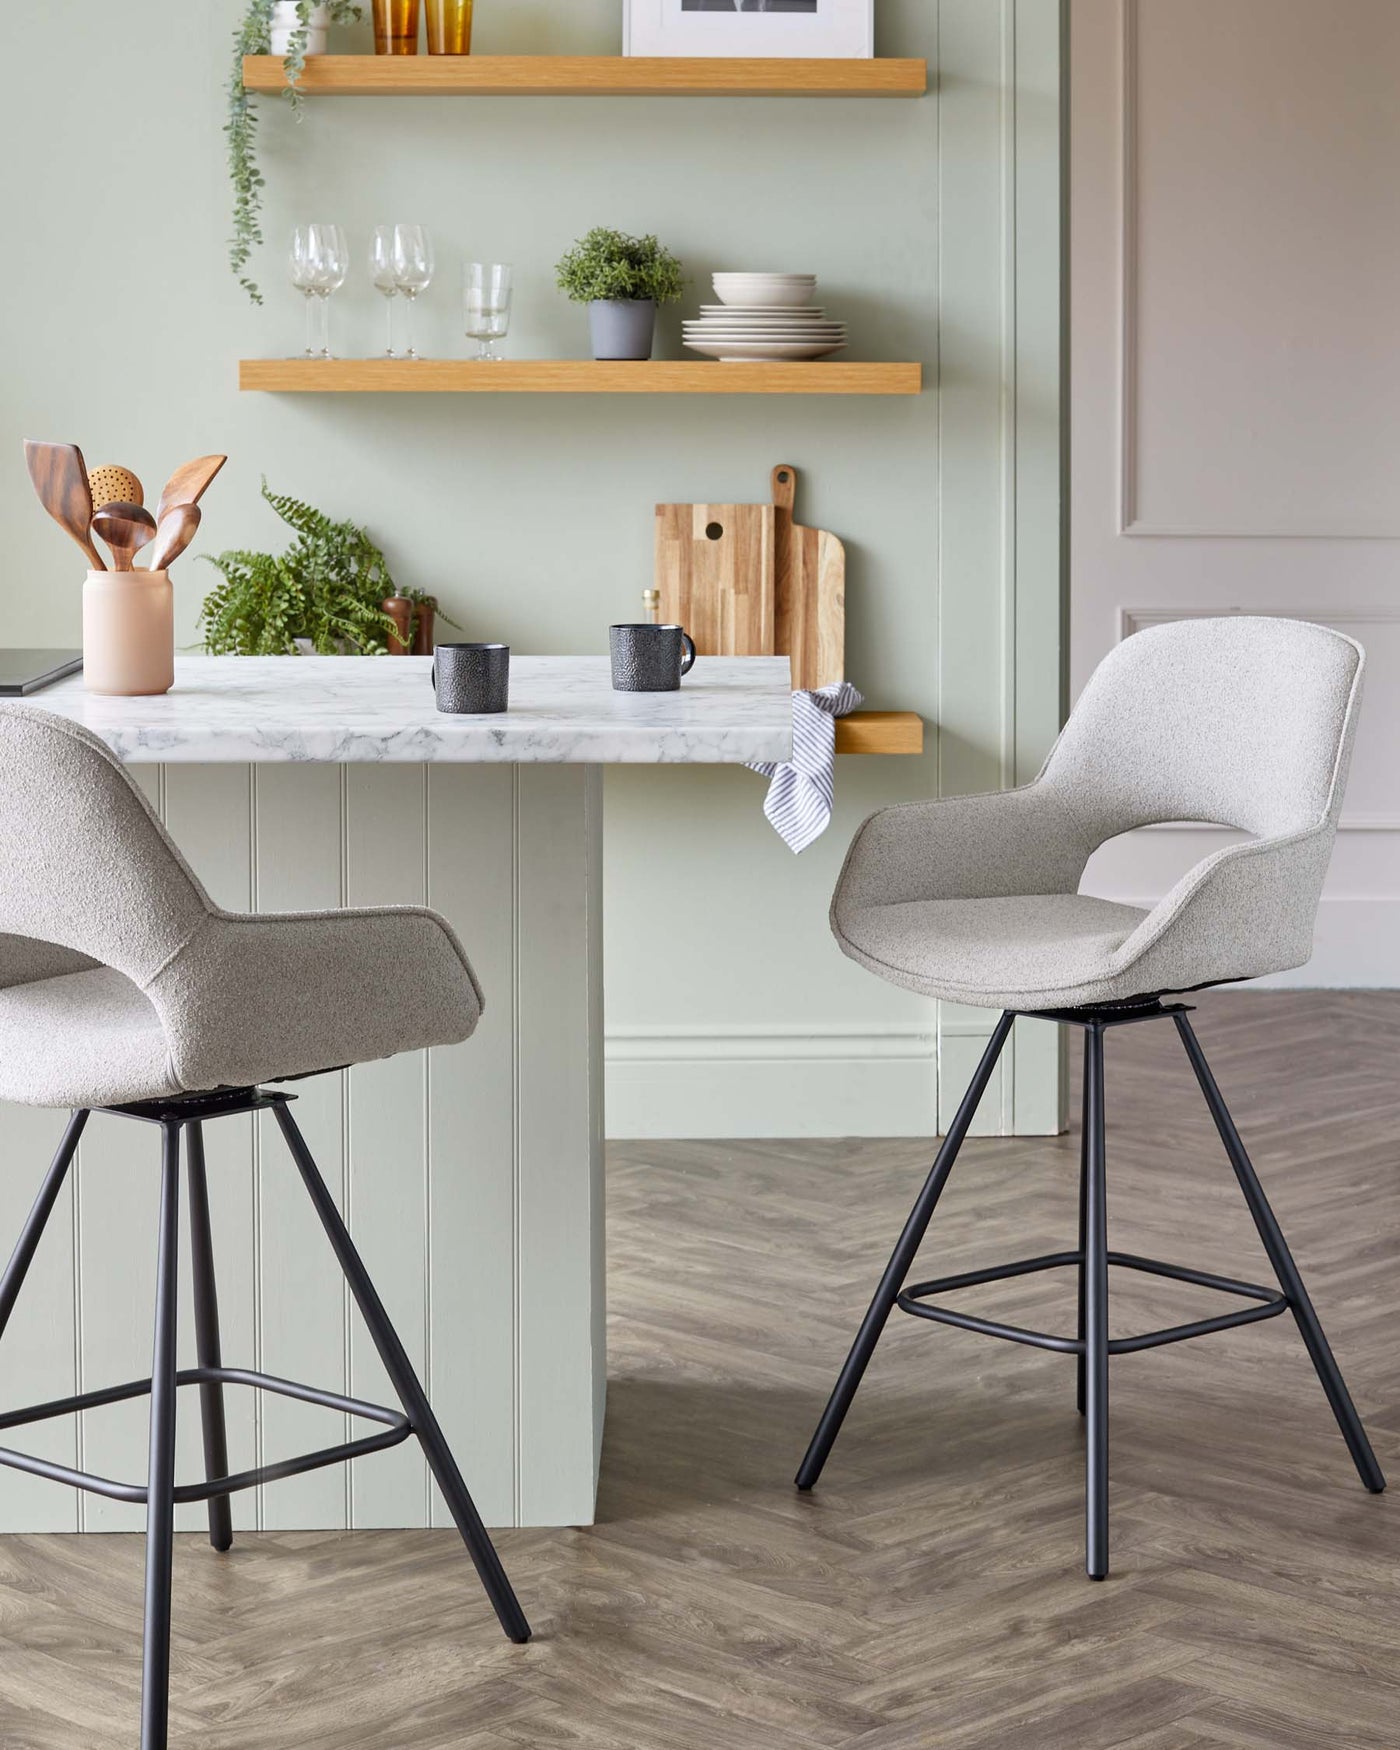 Two modern, fabric-upholstered, bar-height chairs with a curved backrest and slim, black metal legs beside a white marble-topped kitchen island with pale green cabinetry. Wooden shelves with dinnerware and plant accents in the background.